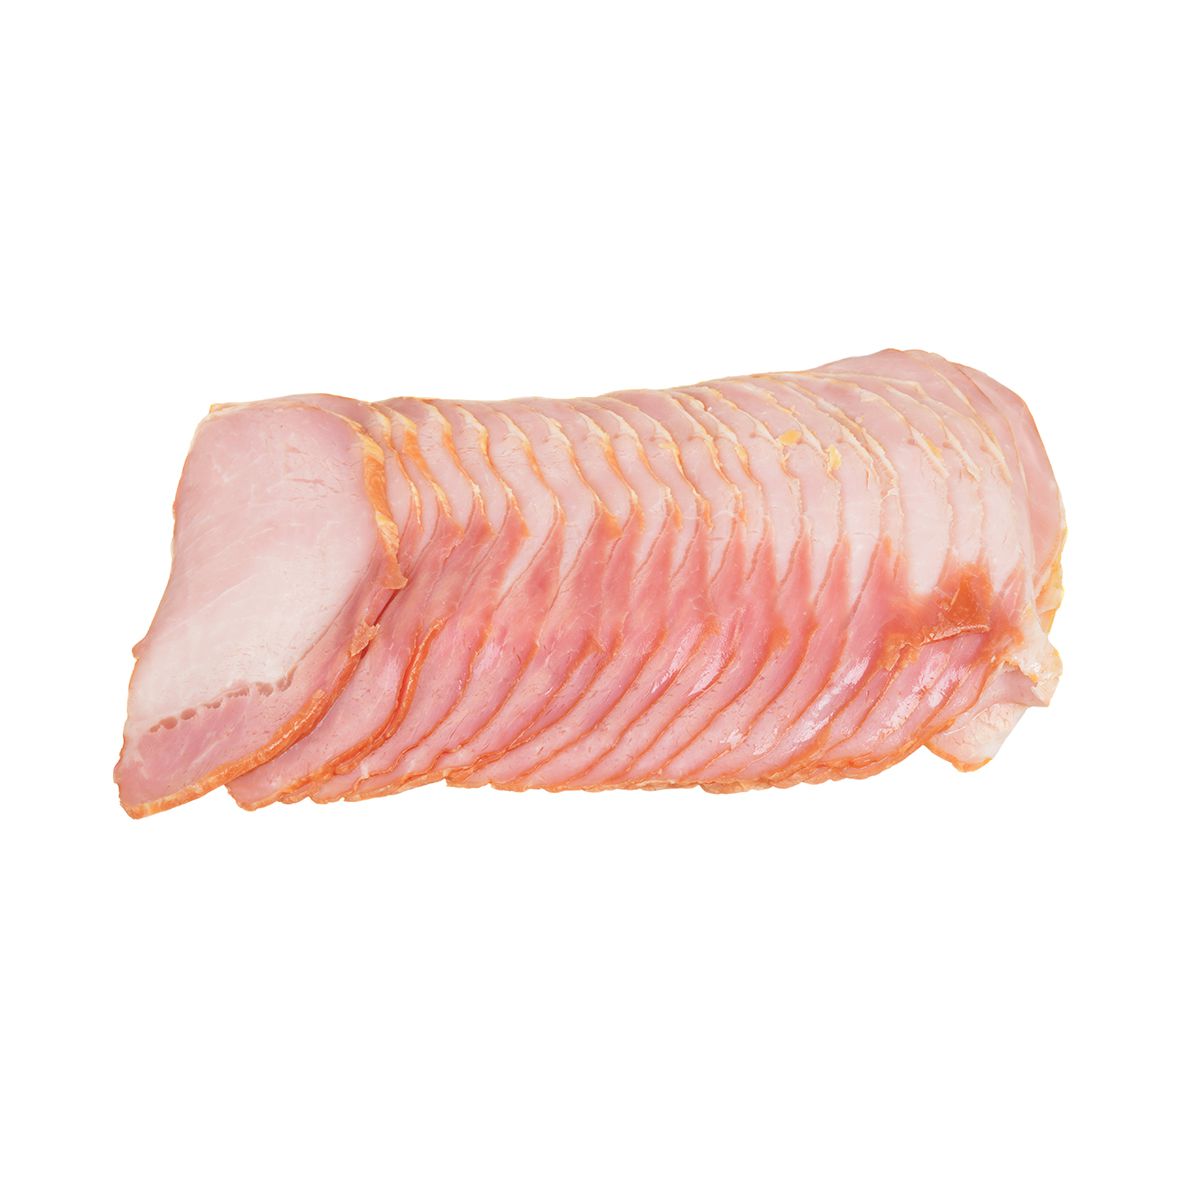 Compart Family Farms Canadian Bacon